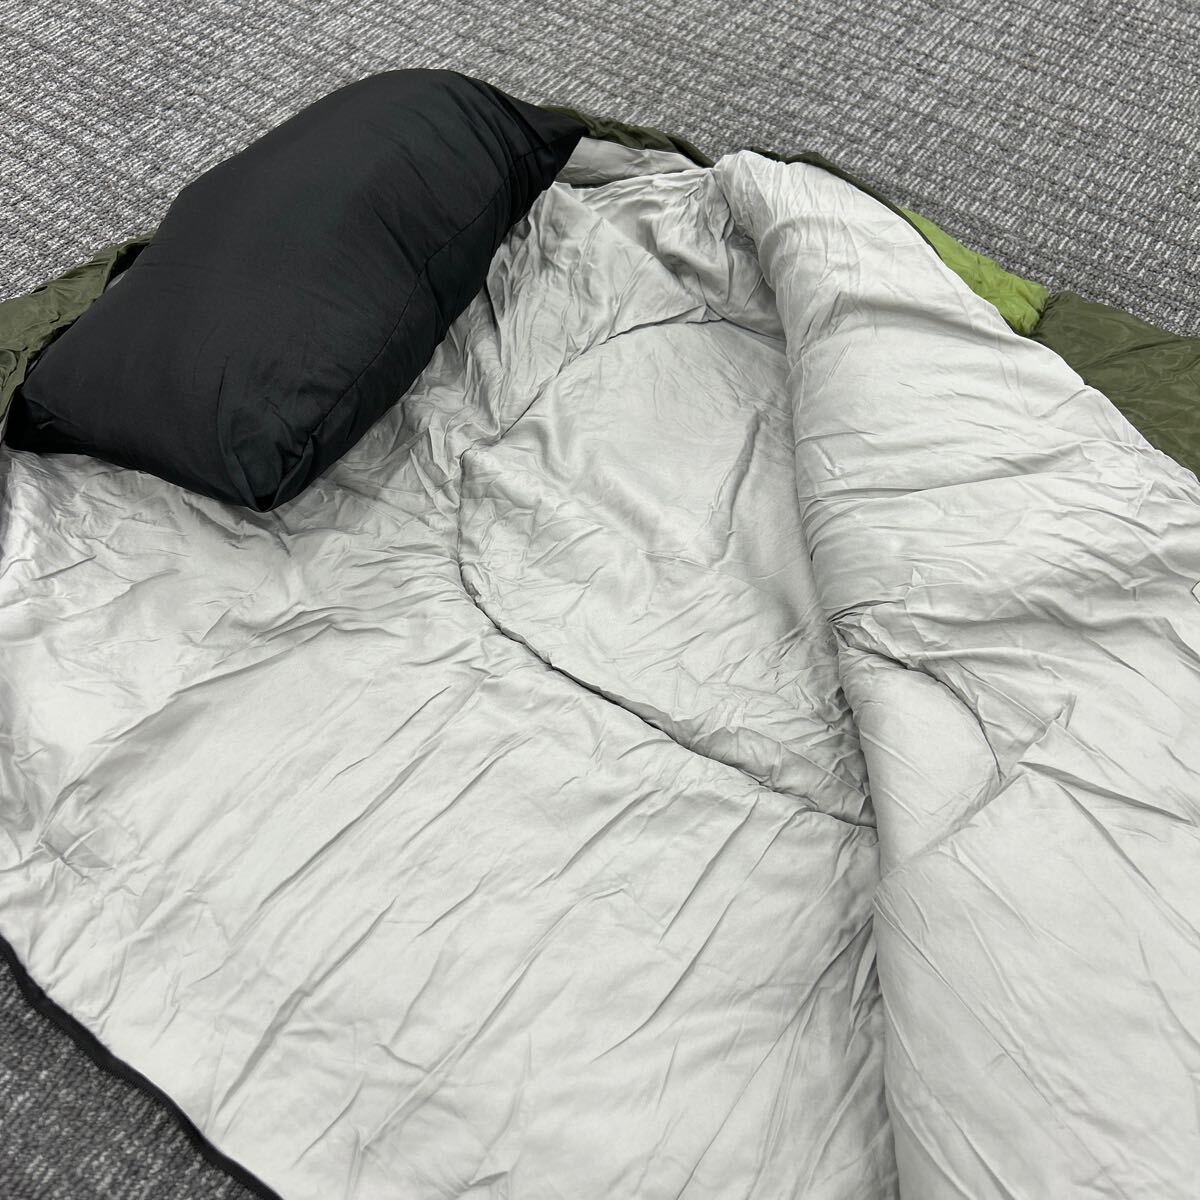  sleeping bag pillow attaching sleeping bag wide size limit use temperature -10*C envelope type winter sleeping area in the vehicle camp 29